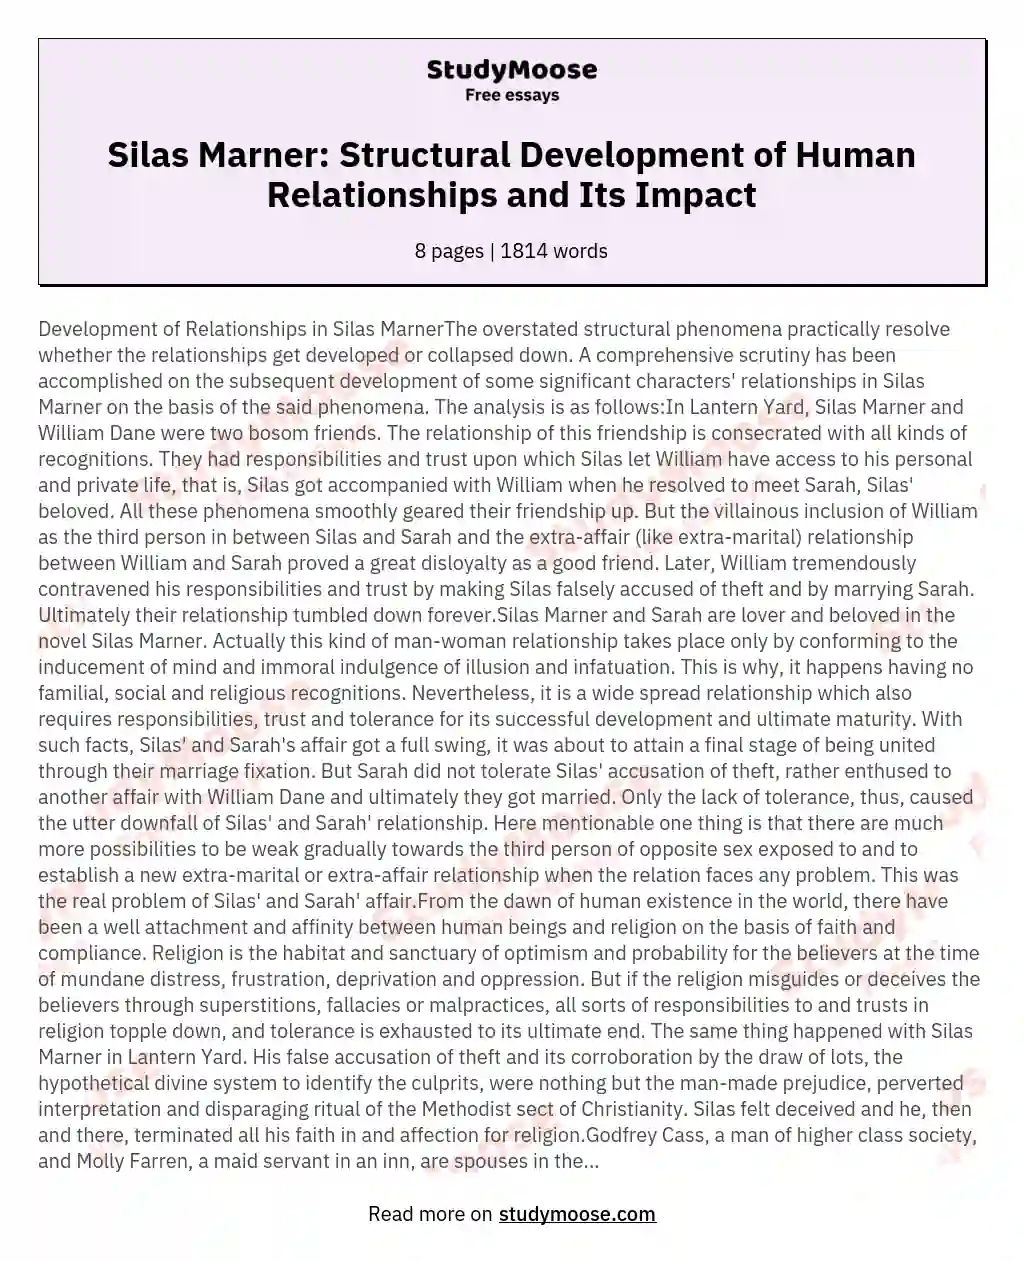 Silas Marner: A Paradigm of Structural Development of Human Relationship and Its Impact on Human Existence